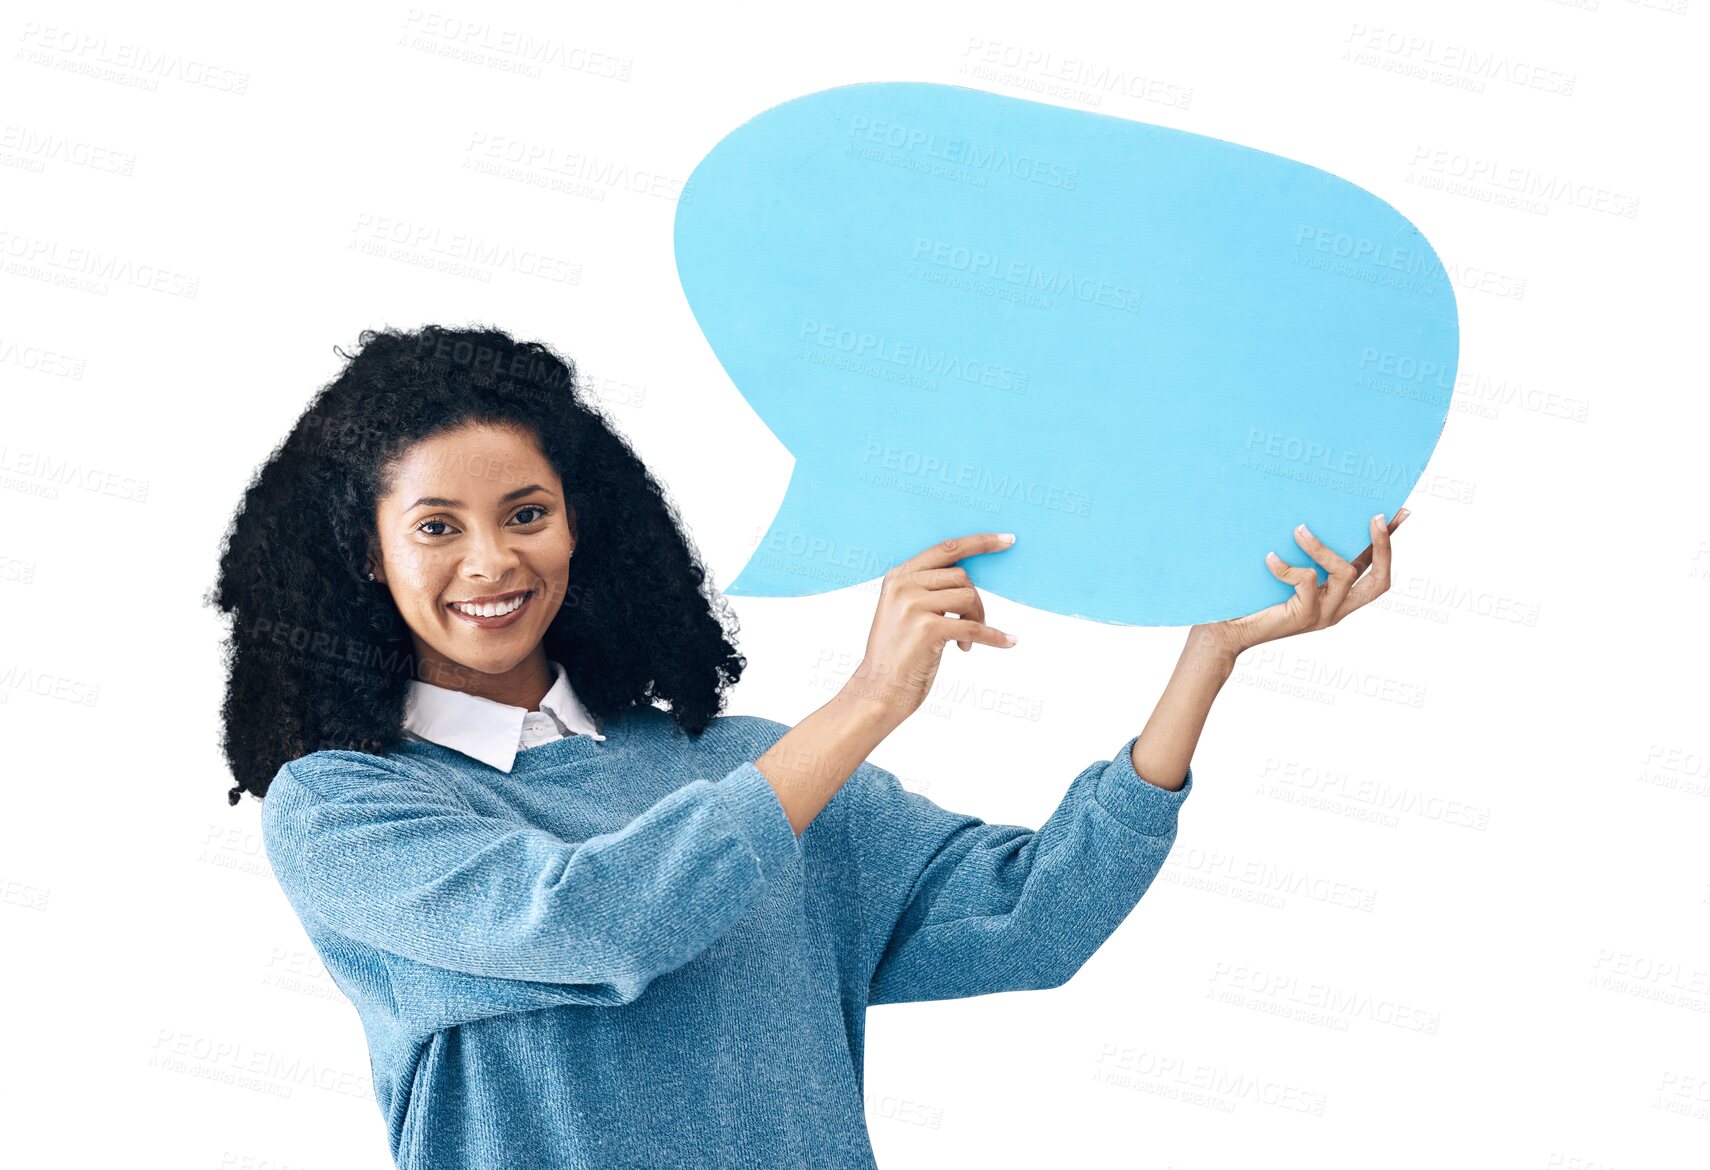 Buy stock photo Happy woman, portrait and speech bubble for social media or communication isolated on a transparent PNG background. Female person smile with icon, symbol or shape for news, alert or advertising